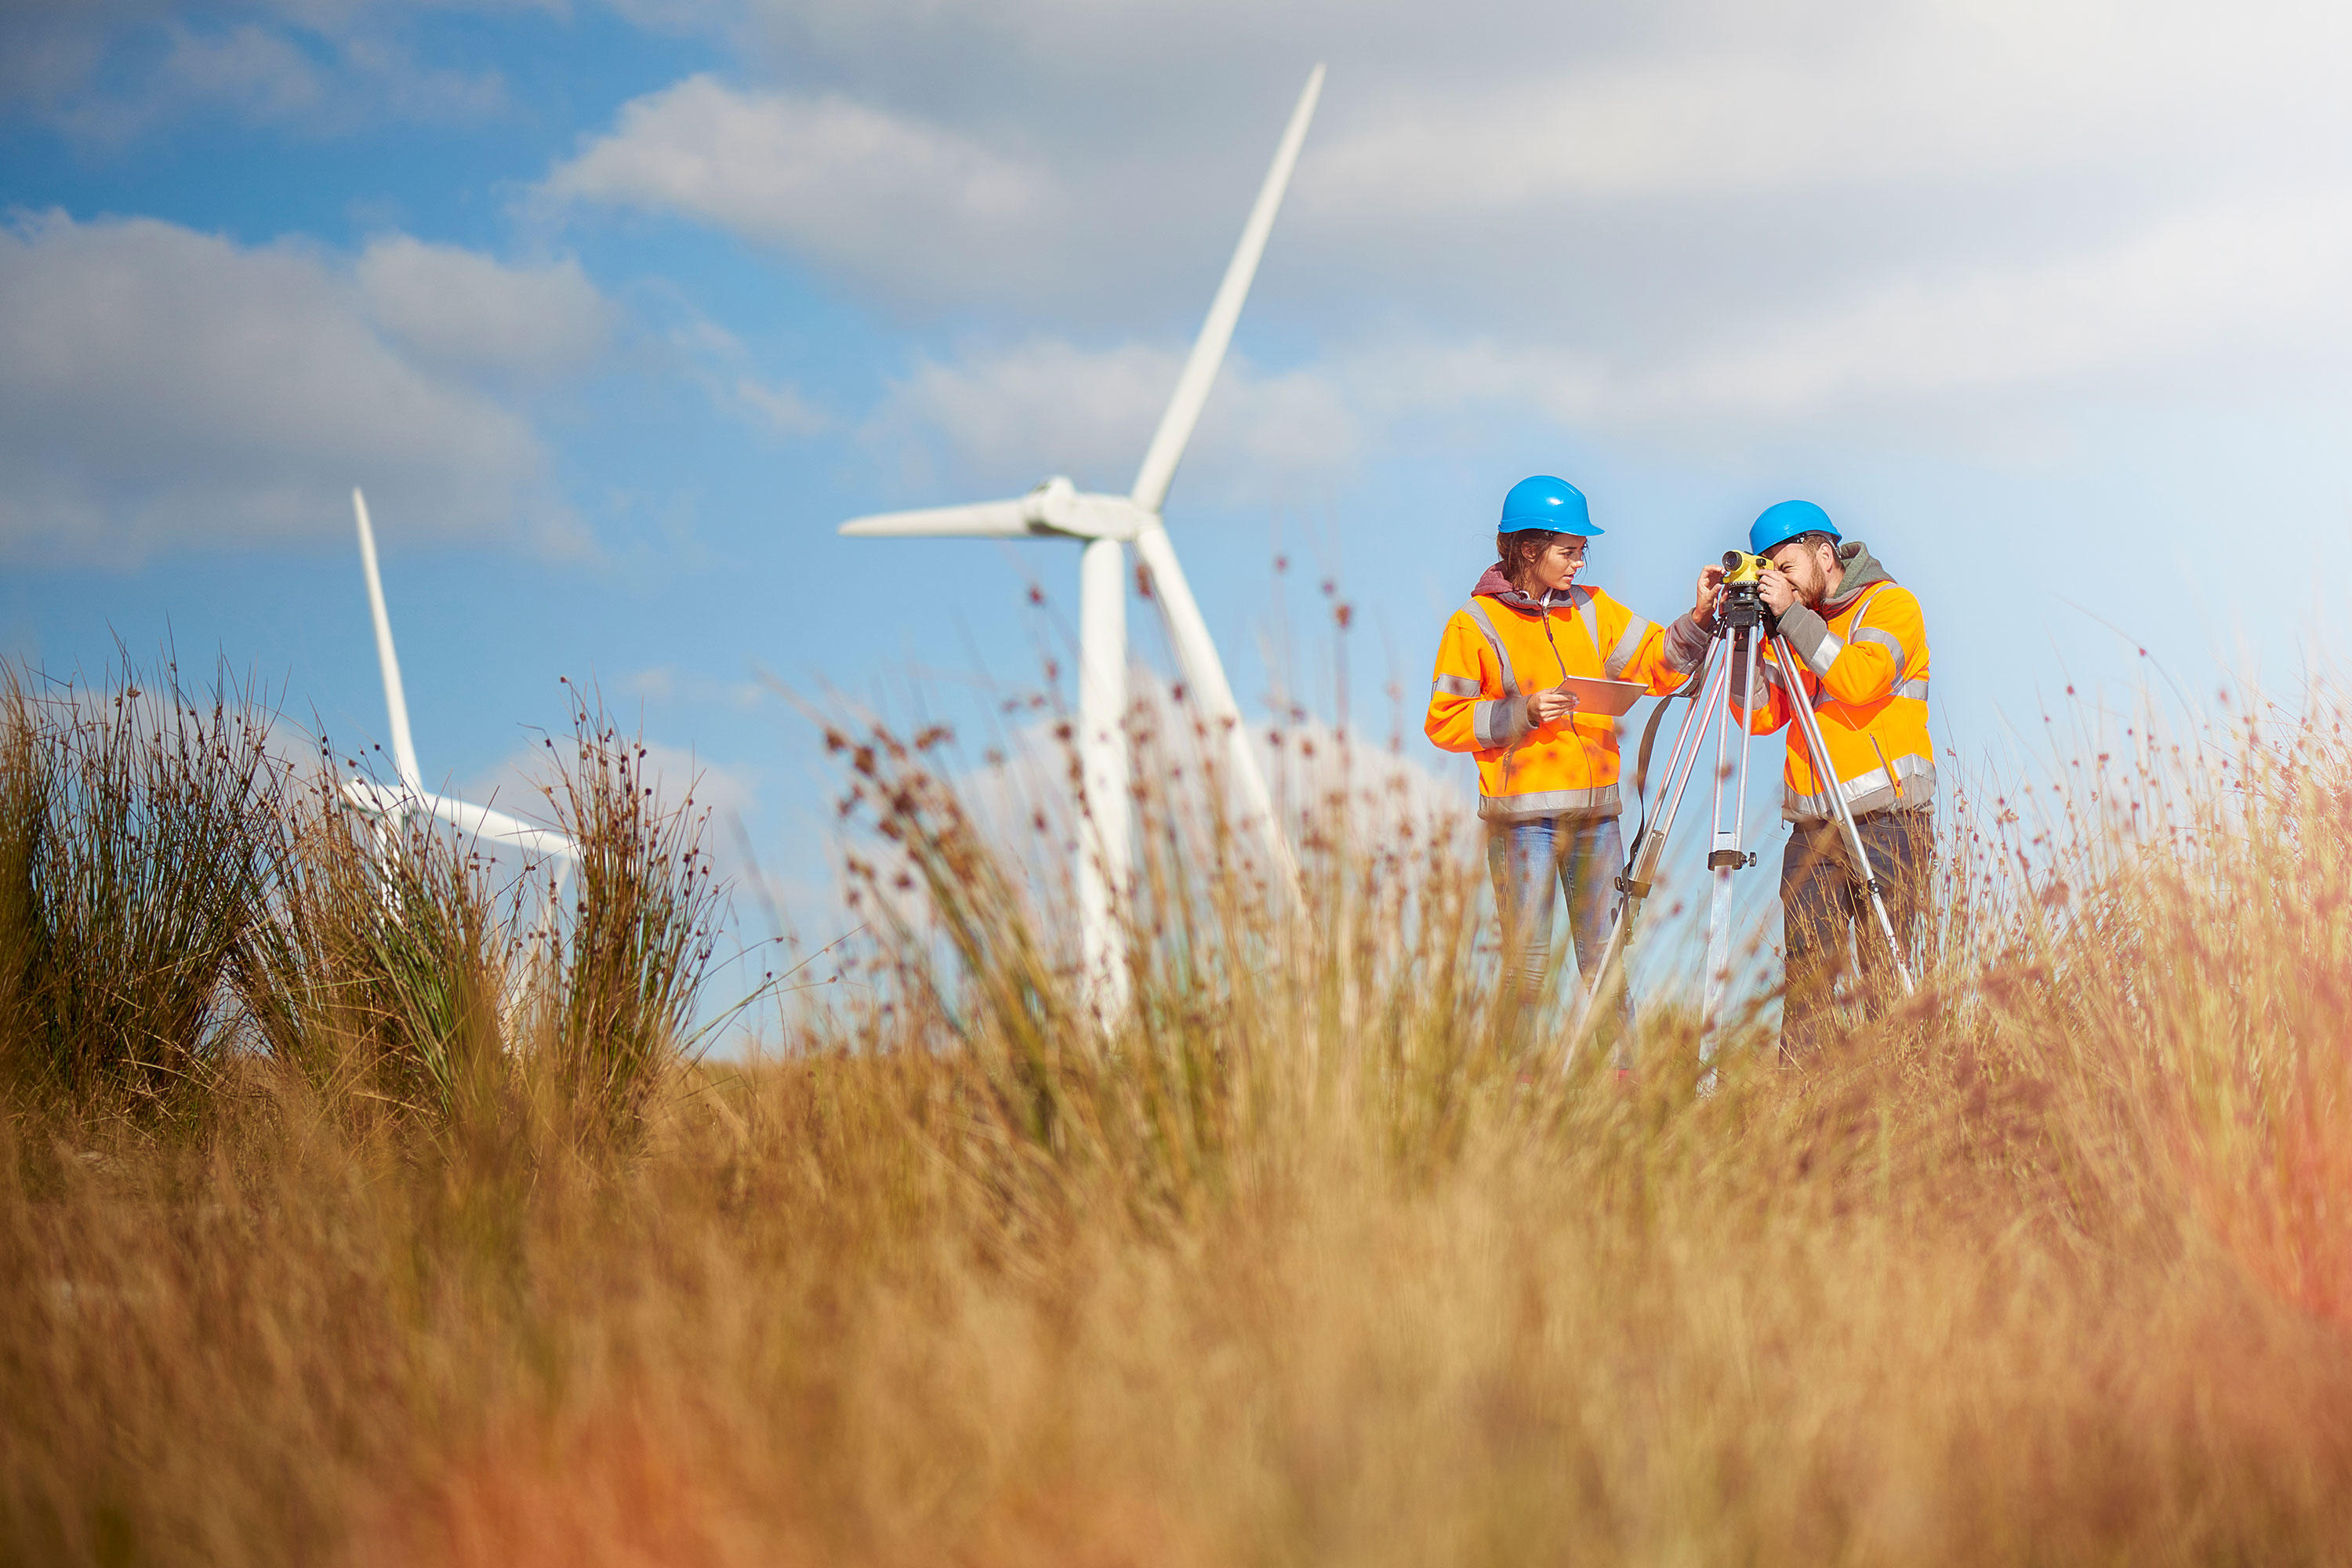 Two individuals stand before a wind turbine in a field